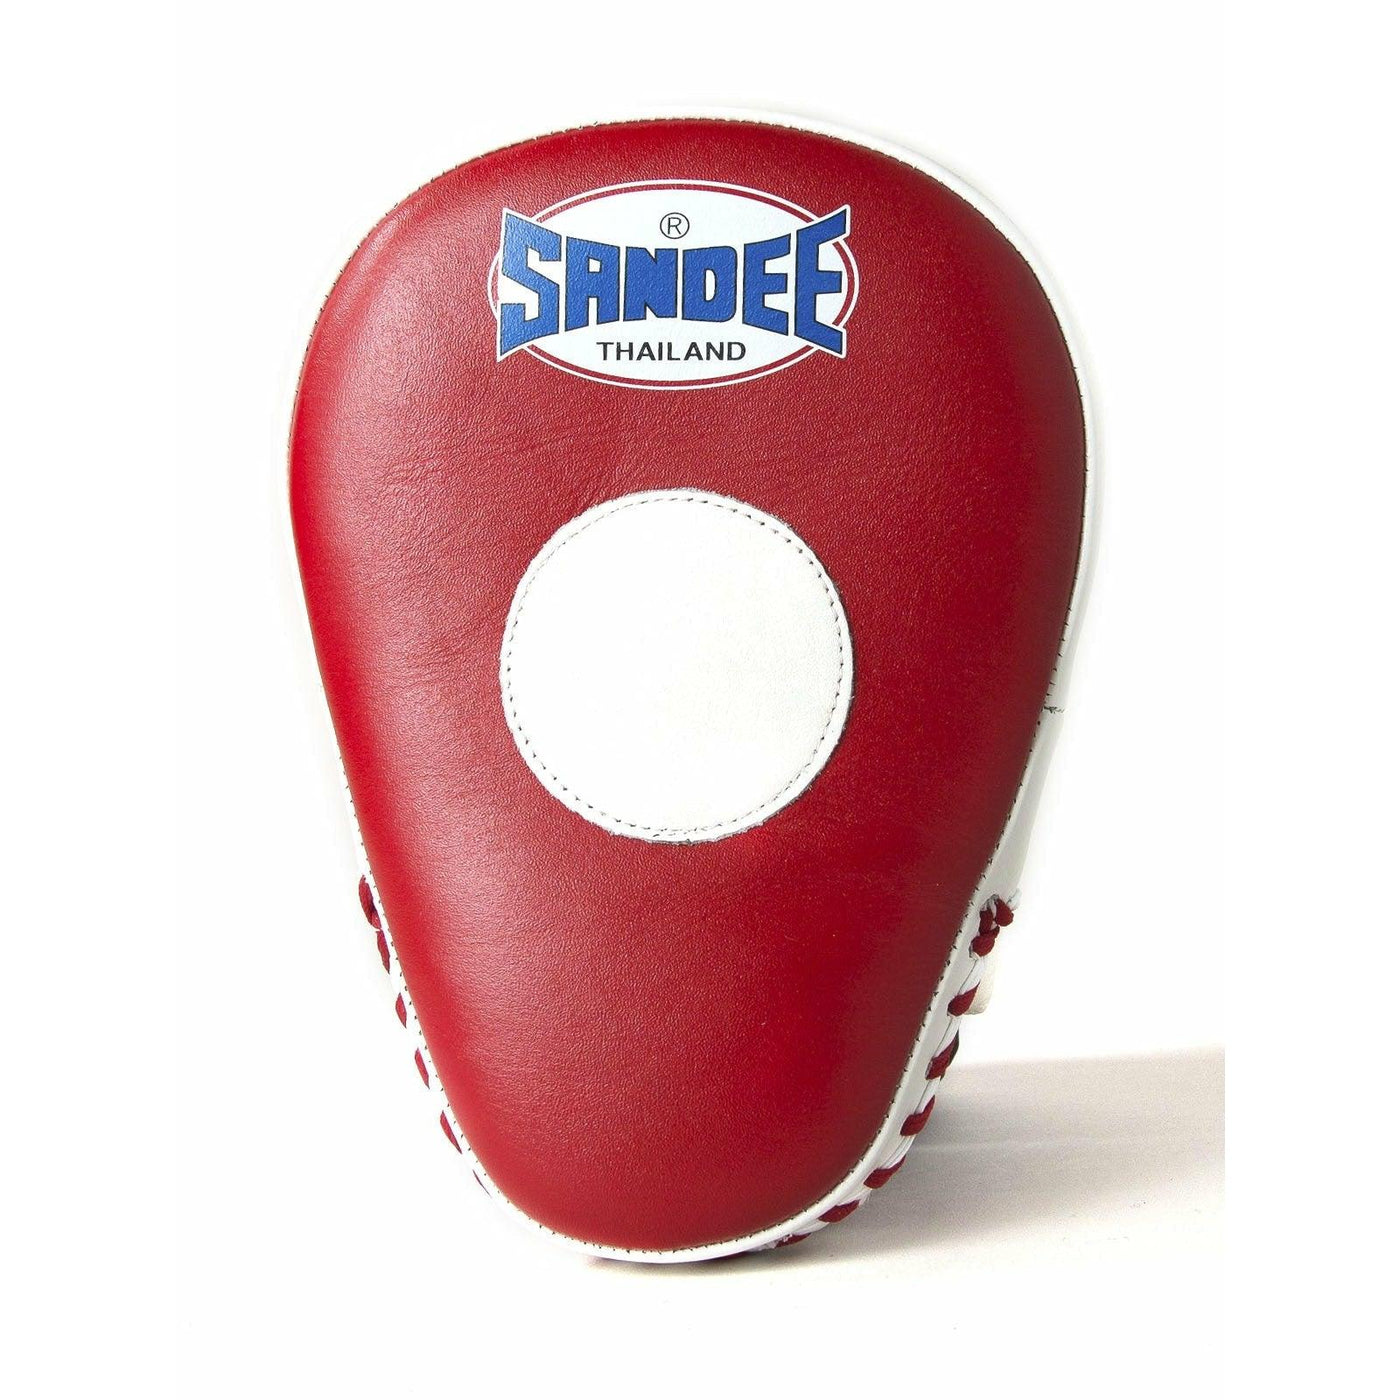 Sandee Curved Focus Mitts - Red & White - Muay Thailand